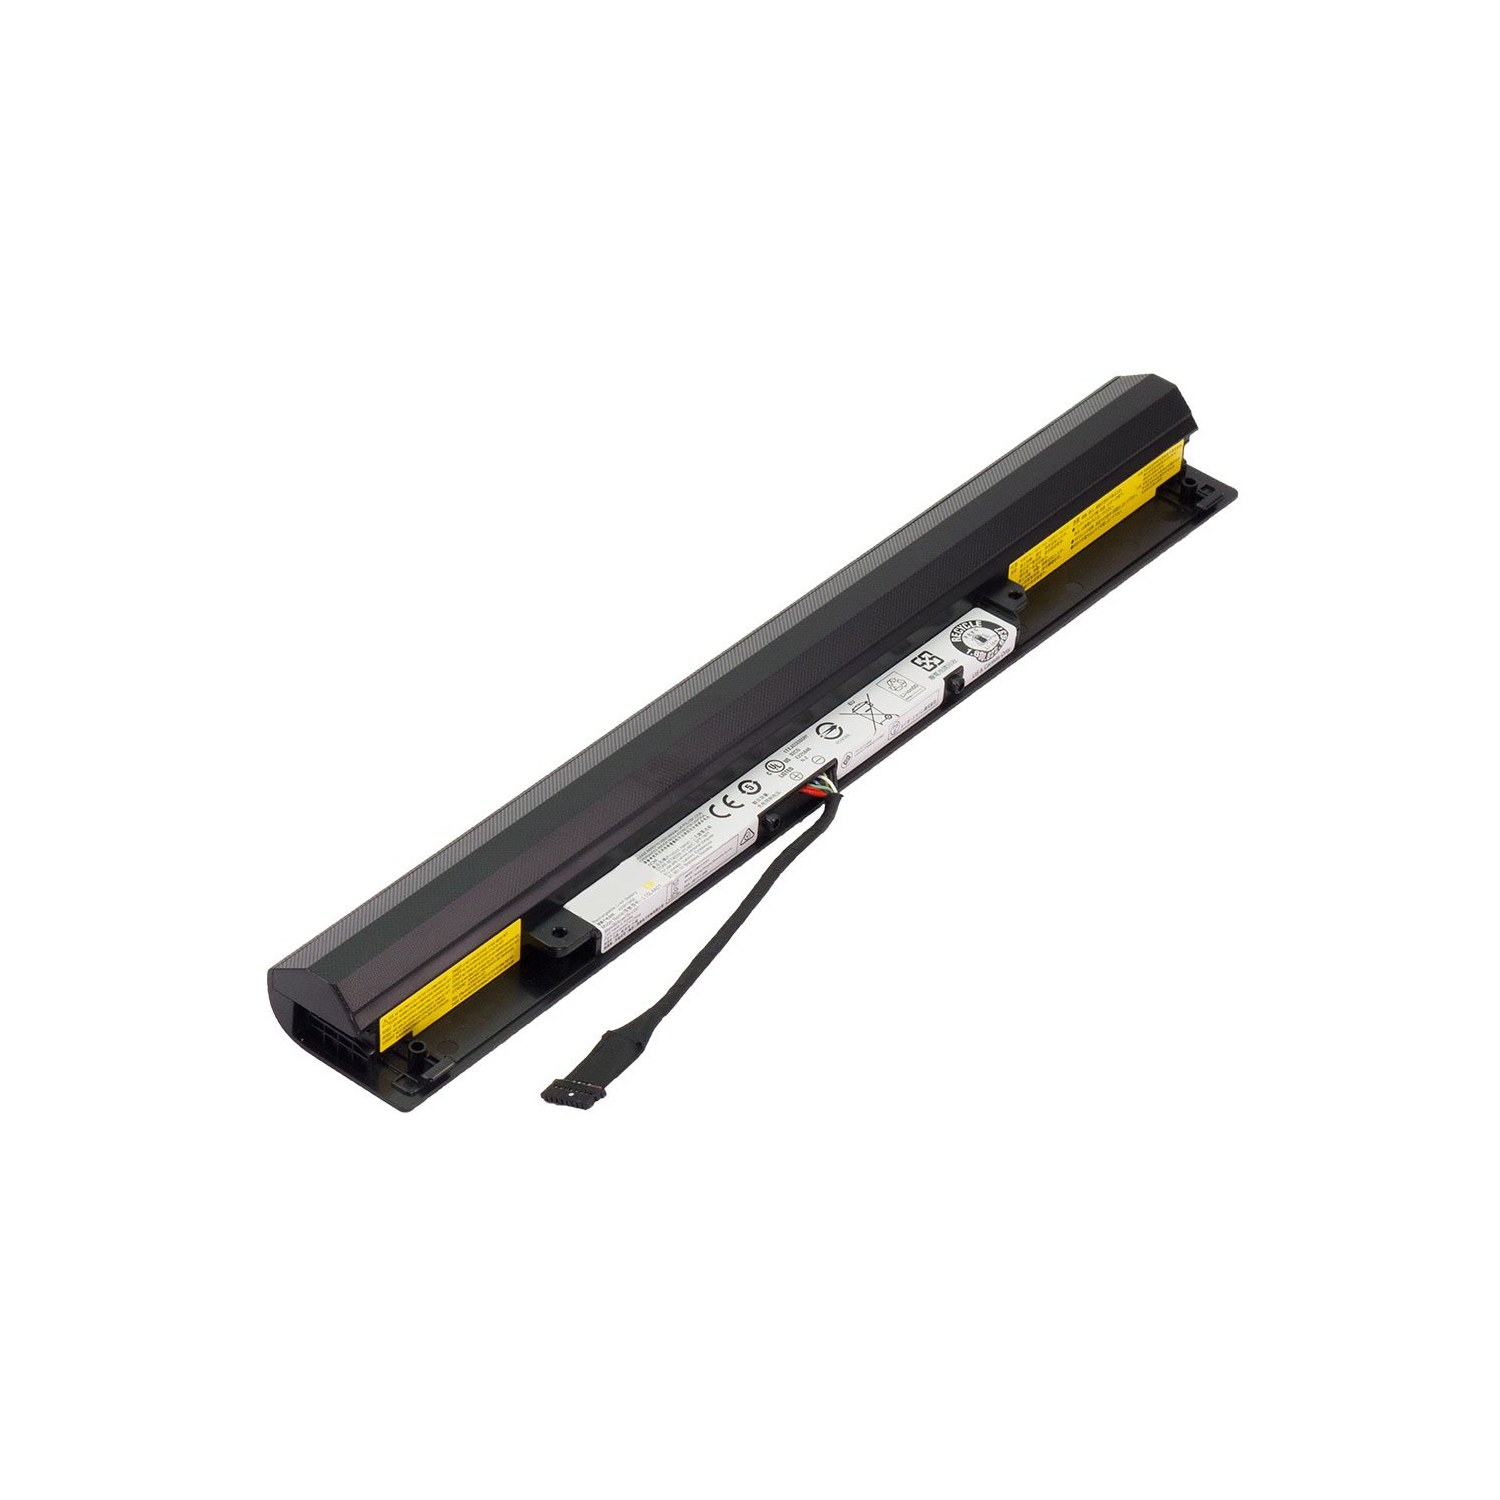 Laptop Battery Replacement for Lenovo IdeaPad 100-15IBD 80QQ, 41NR19/65, L15L4A01